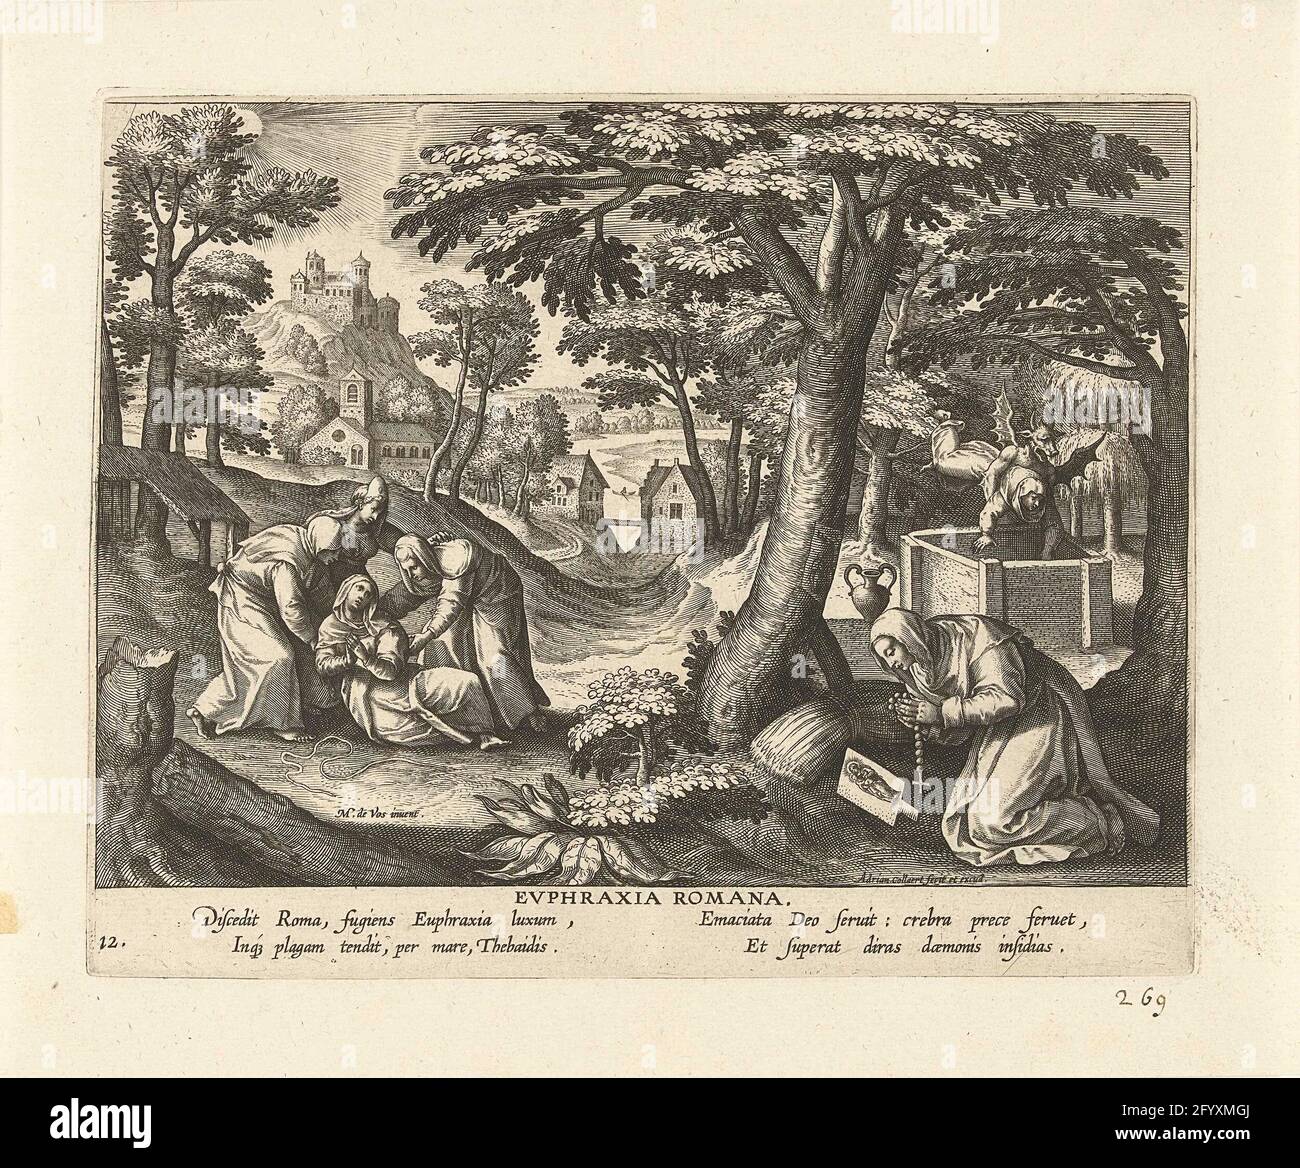 Euphrasia of Rome; Evphraxia Romana; Female hermits; Solitvdo Sive Vitae Foeminarvm Anachoritarvm. Euphrasia of Rome prays in the wilderness. Left in the background she is abused by three women. On the right she is thrown into a well by the devil. The print has a Latin caption and is part of a series of twenty-four prints with the subject of female hermits. Stock Photo